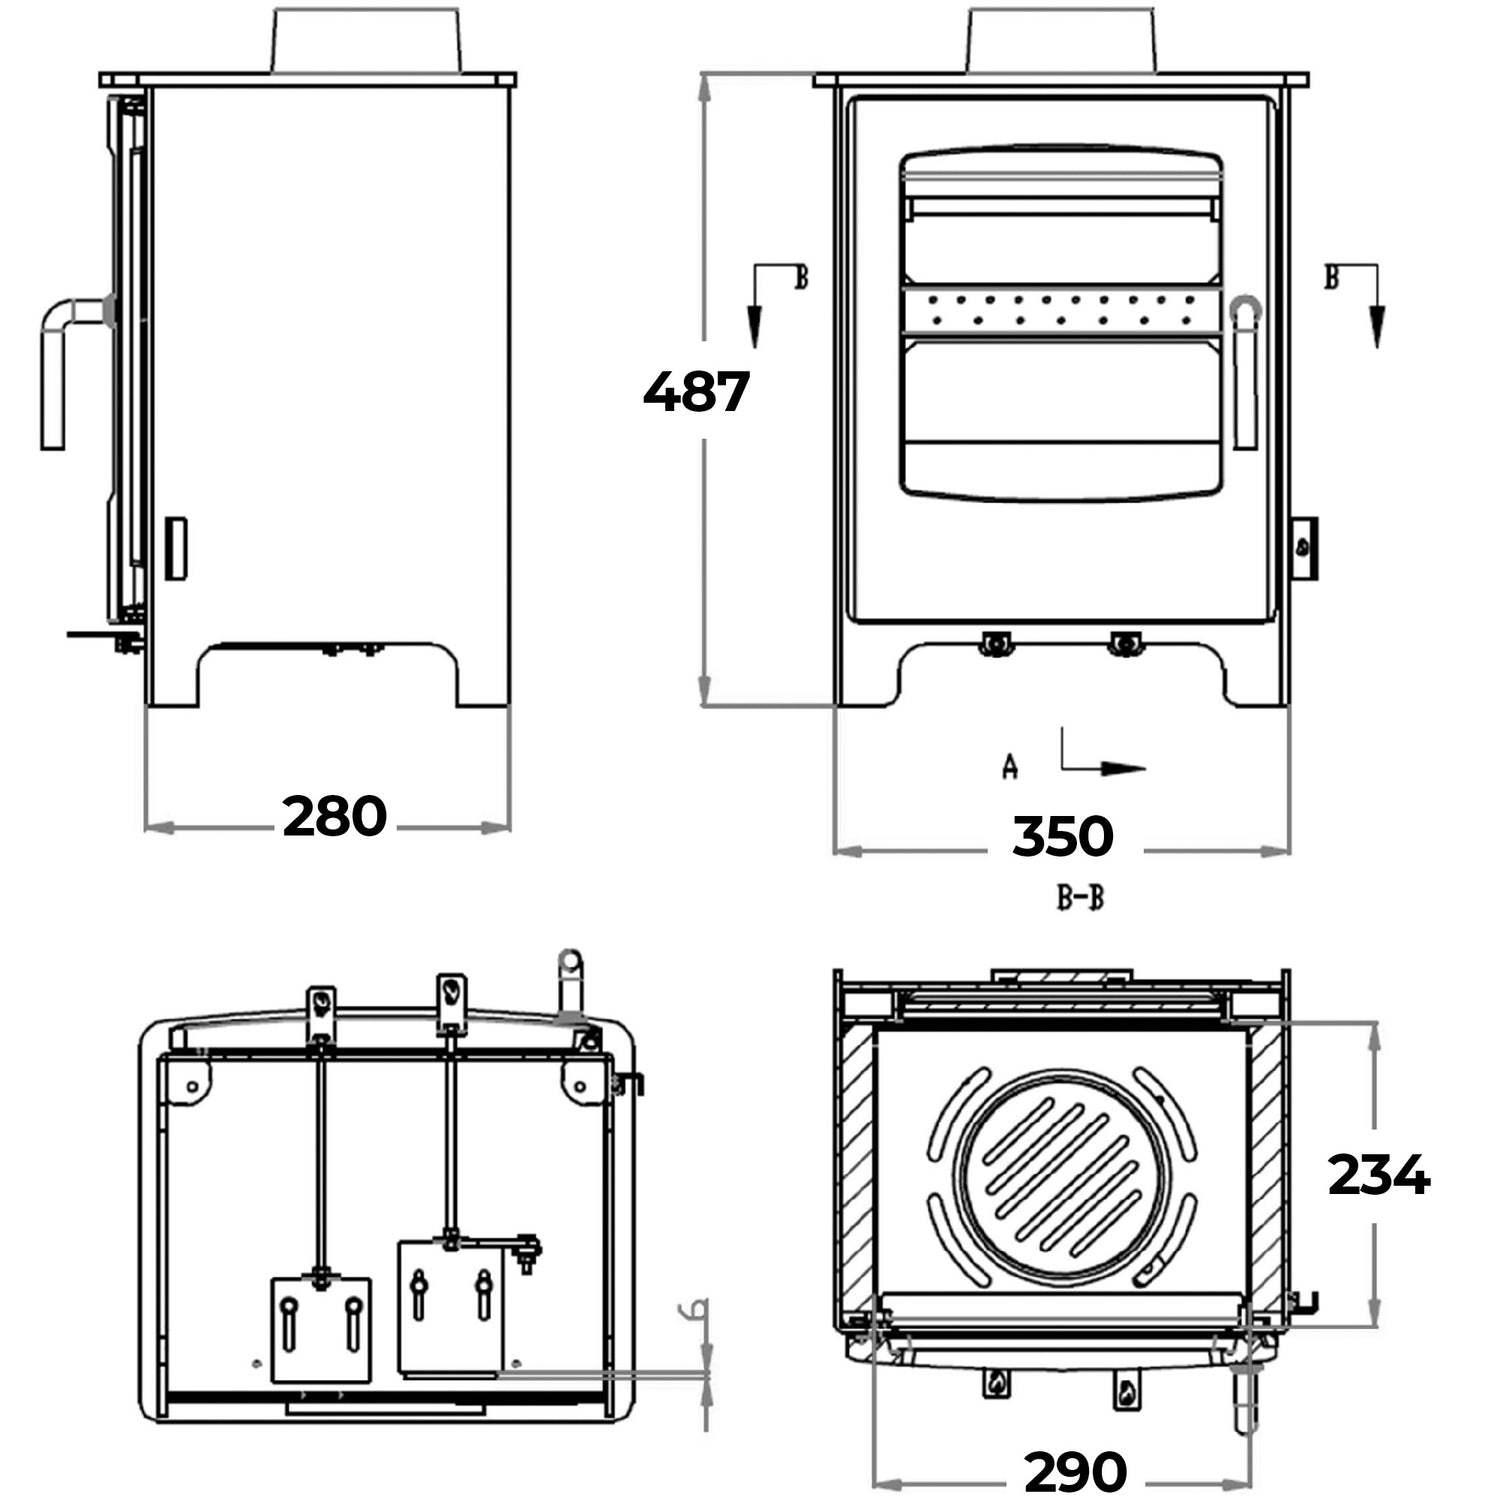 Dimensions and specifications for the Medium Solway Multifuel Stove